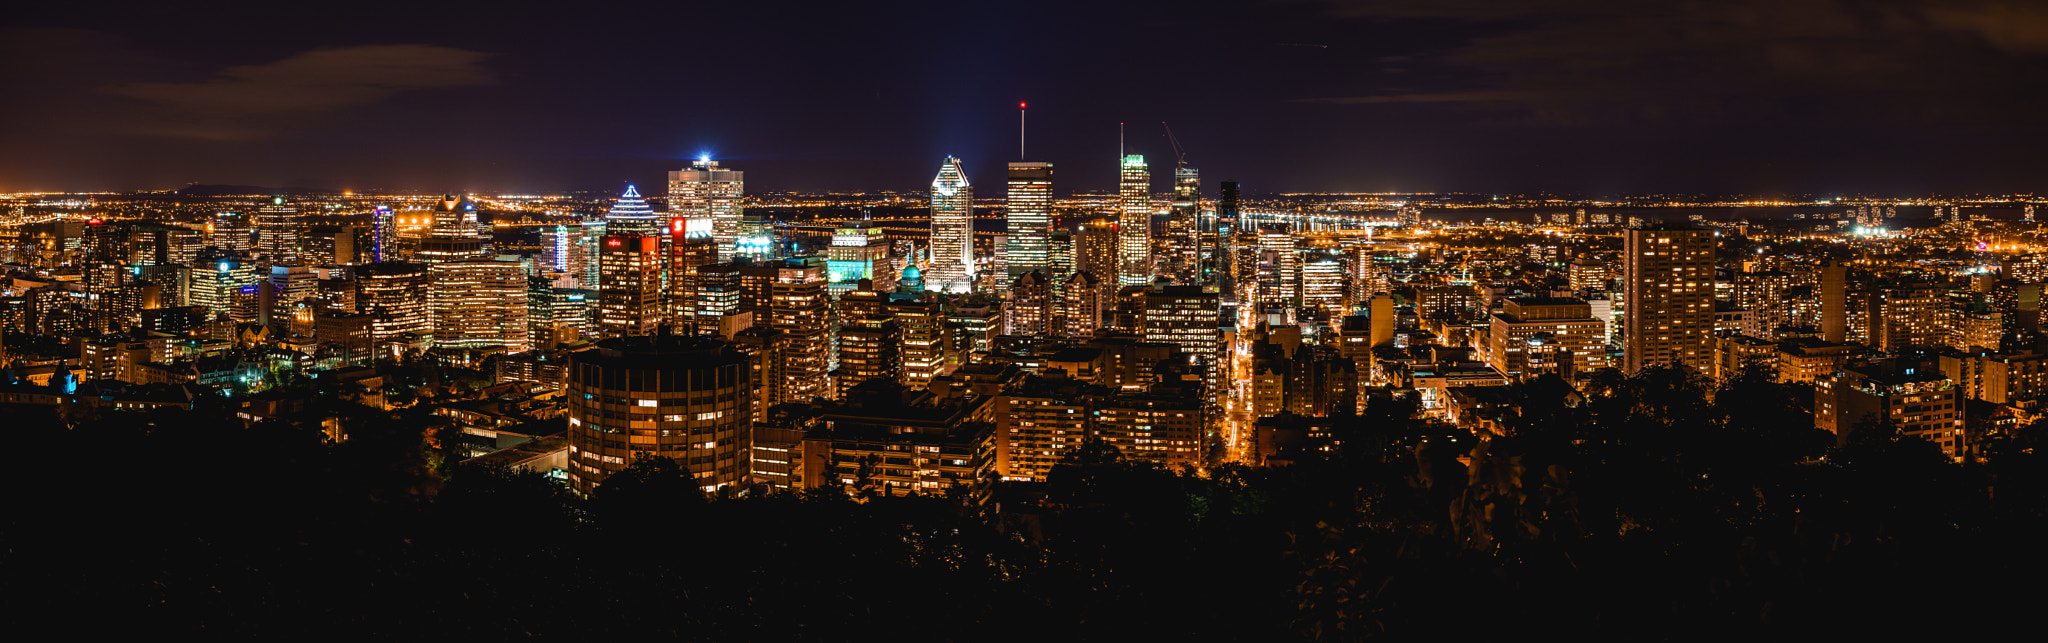 Sony a7 II + Tamron 18-270mm F3.5-6.3 Di II PZD sample photo. Montreal skyline at night photography